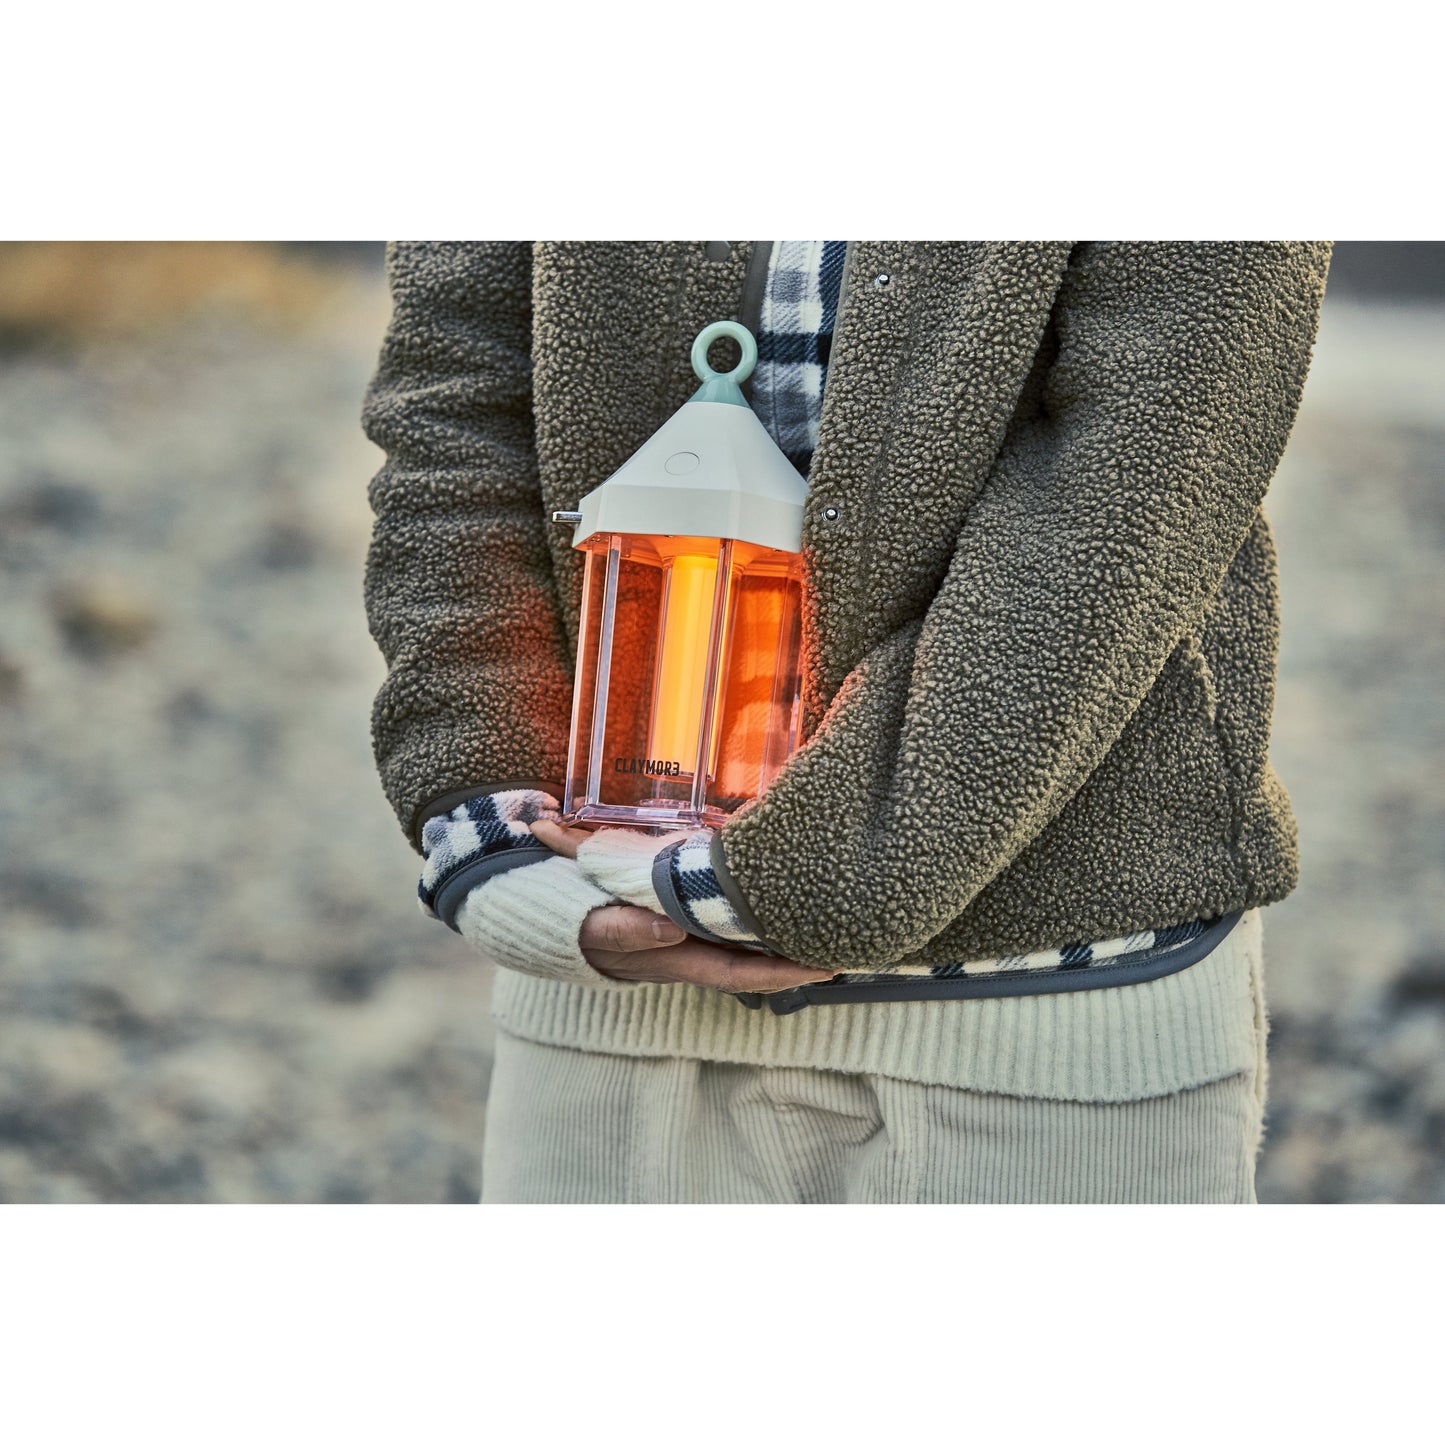 Claymore Cabin Rechargeable Camping Lantern